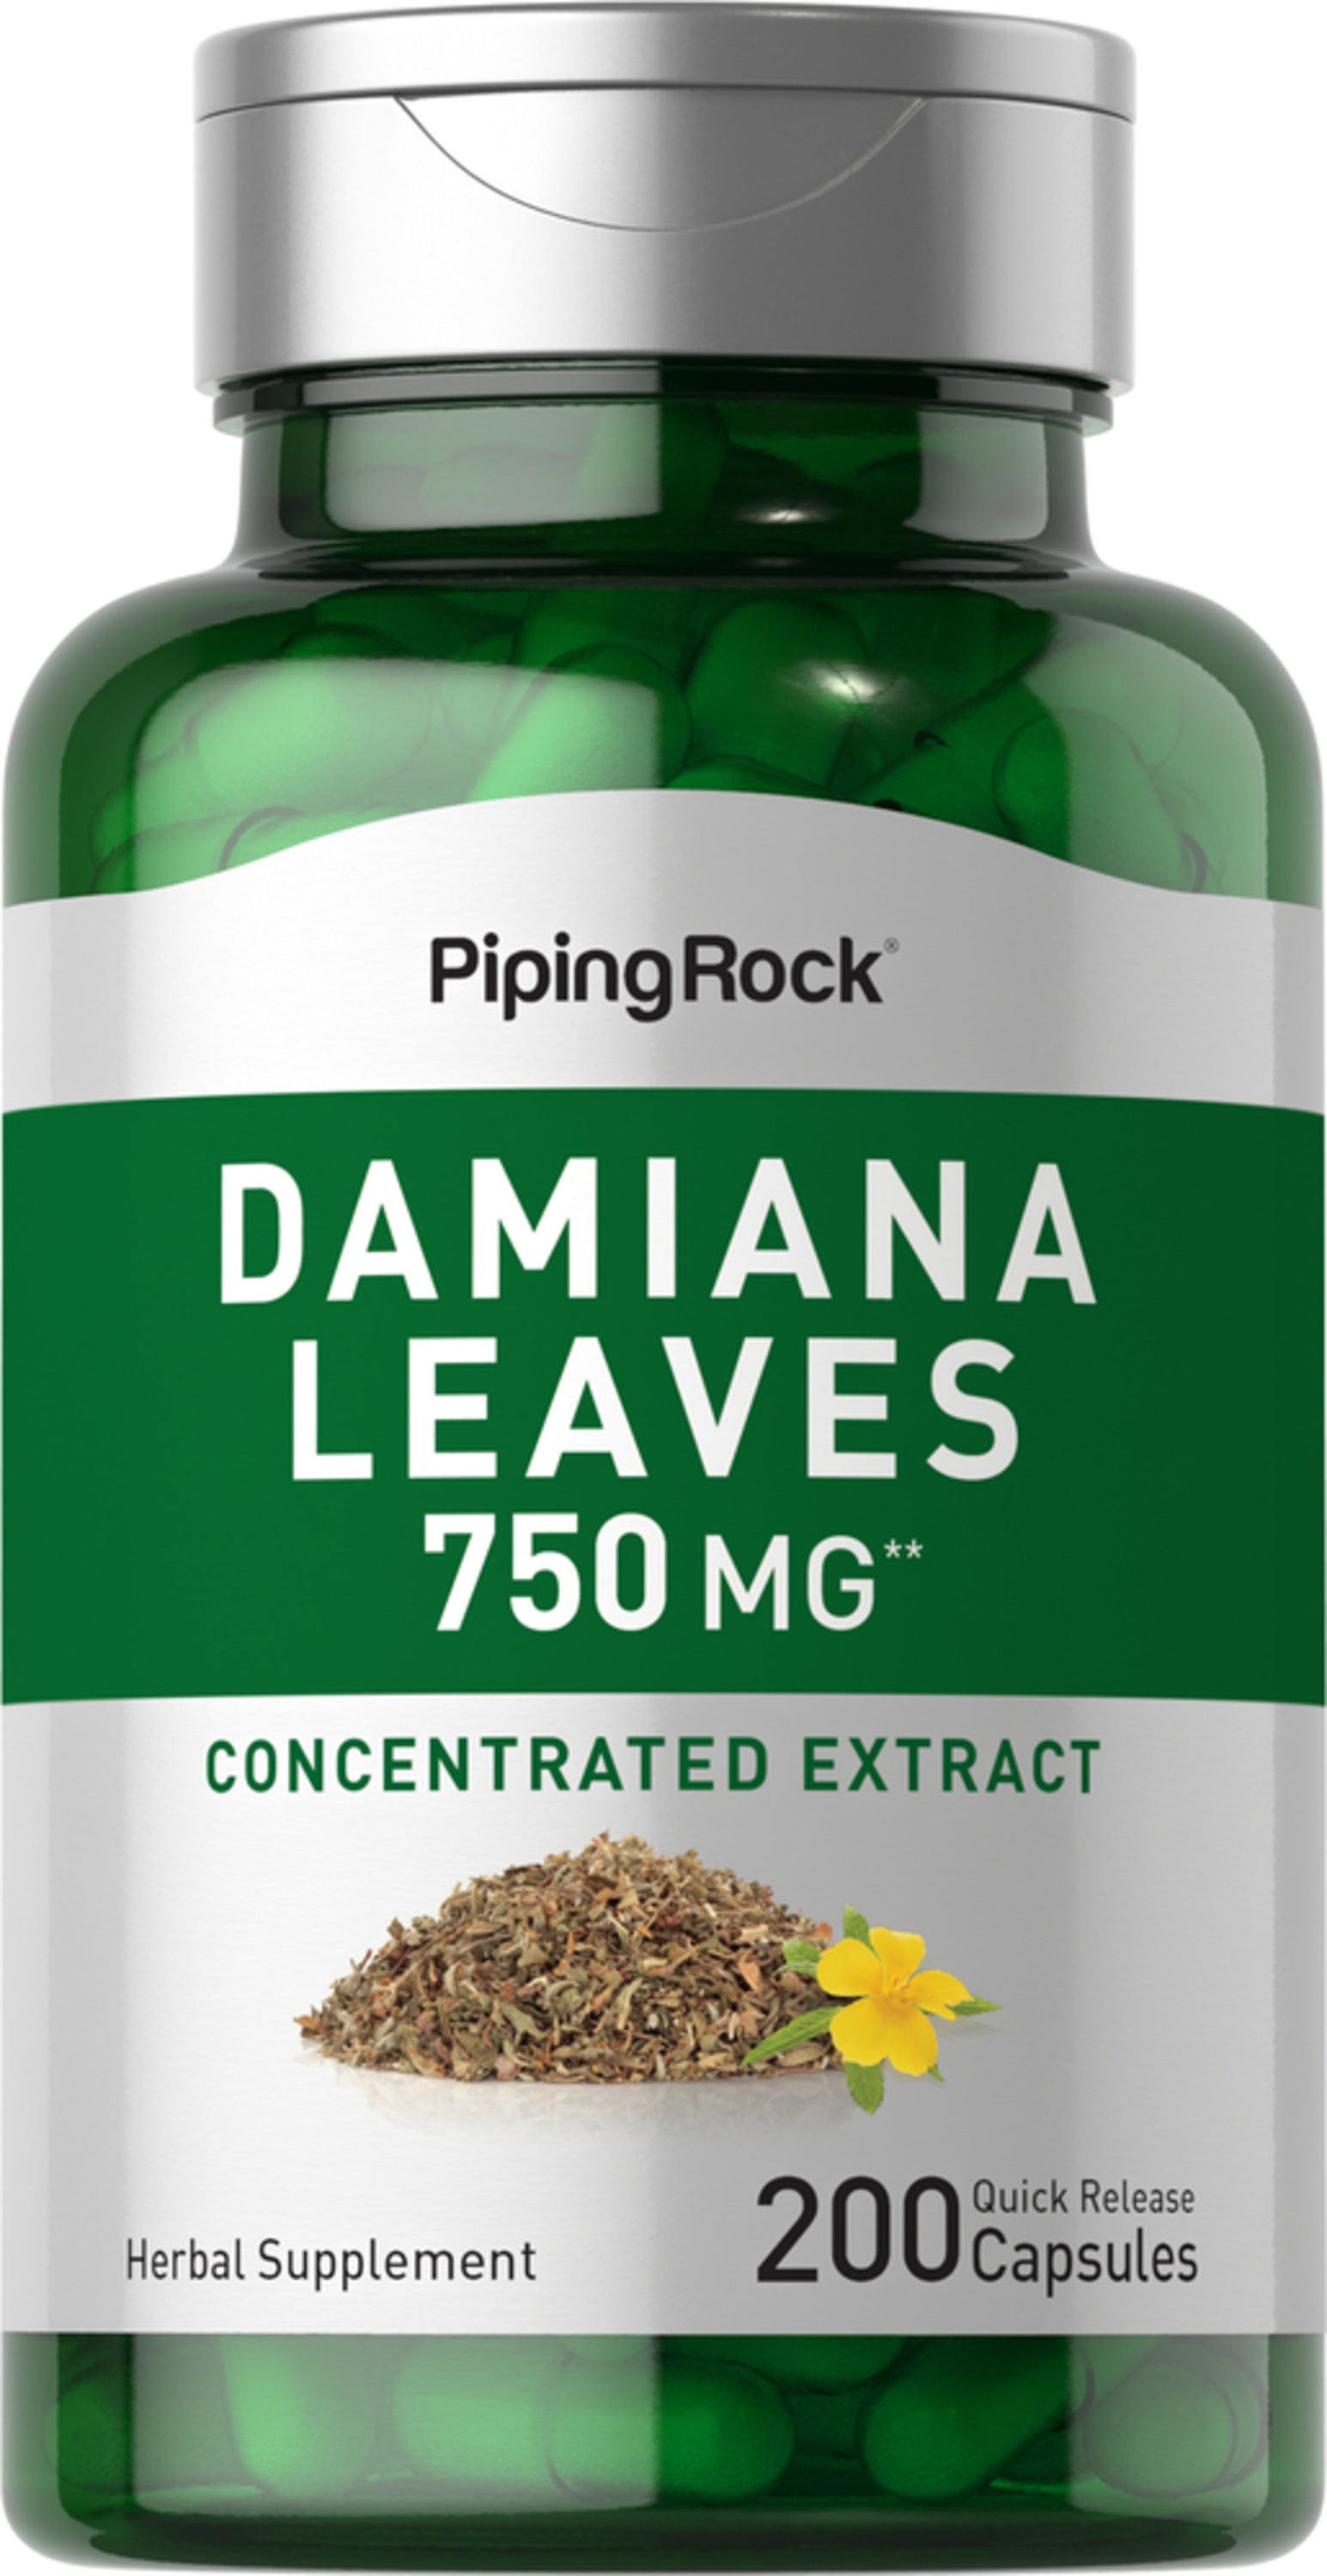 Damiana Leaves, 750 mg, 200 Quick Release Capsules